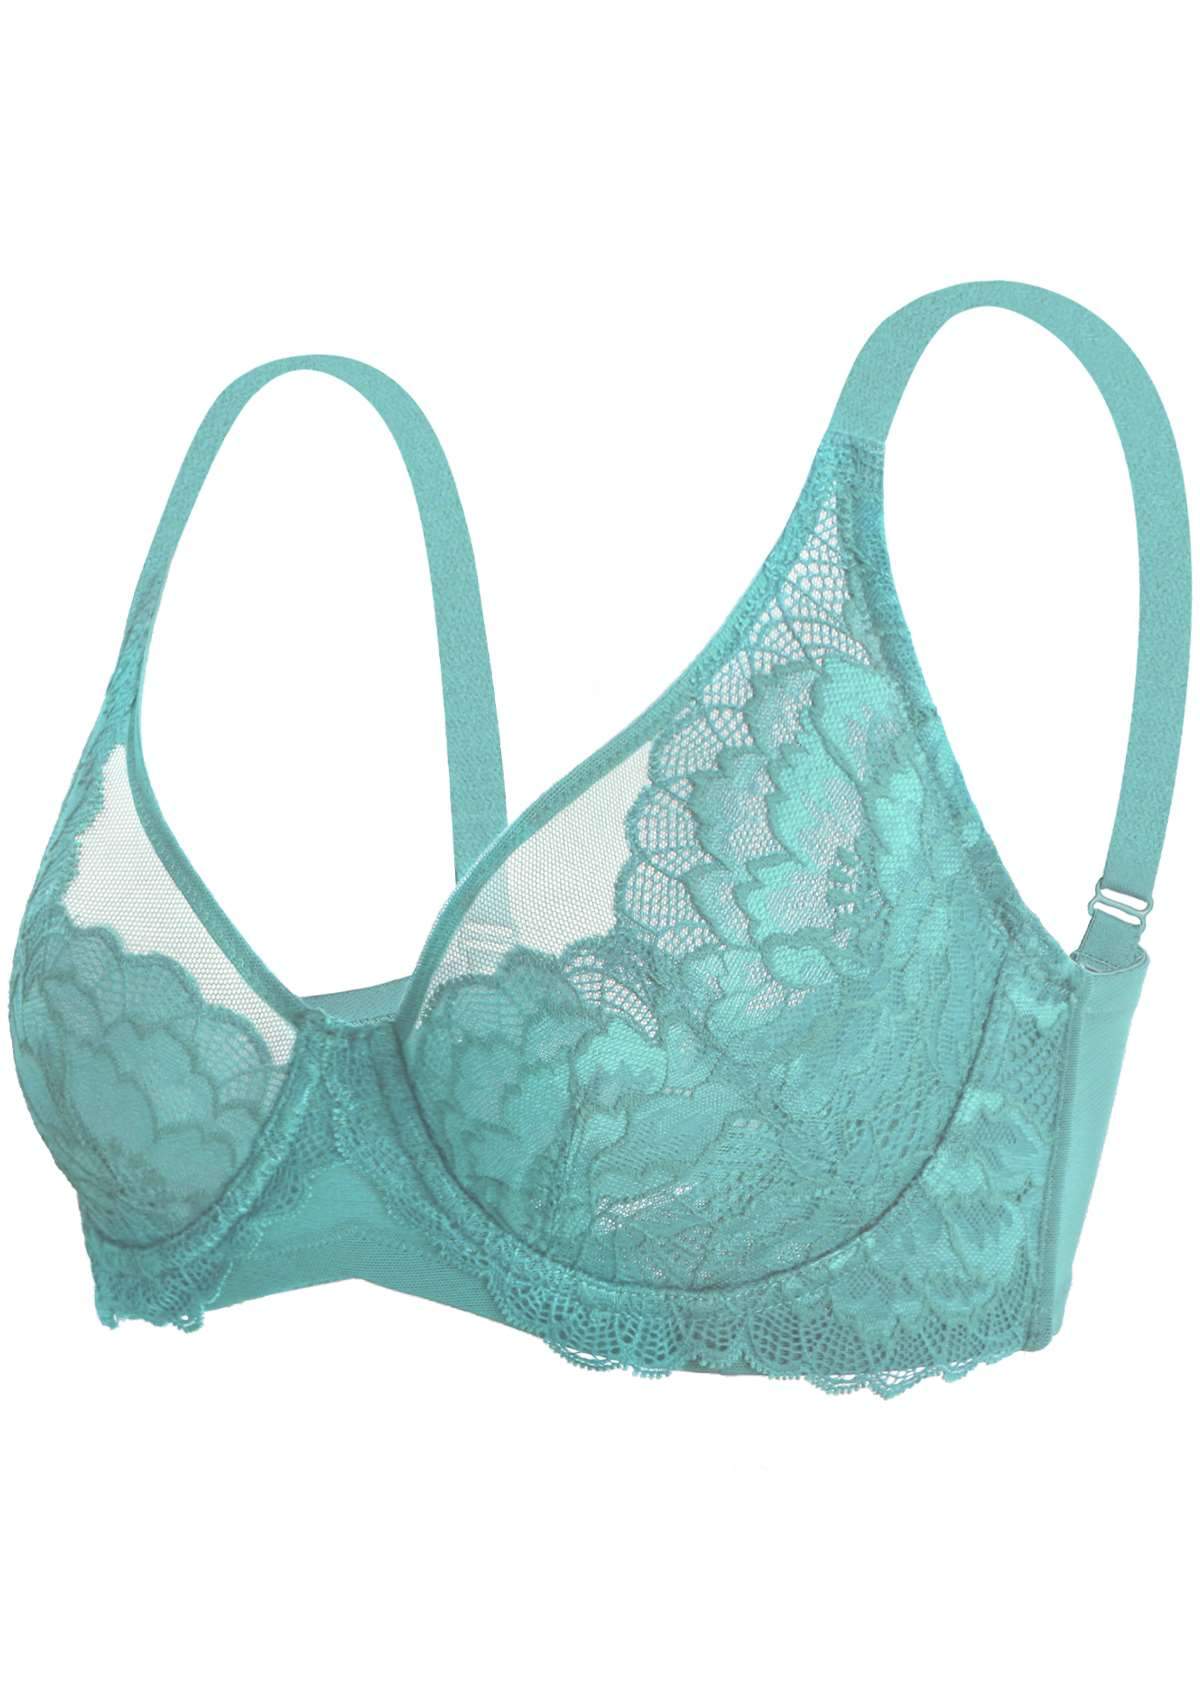 HSIA Paeonia Lace Full Coverage Underwire Non-Padded Uplifting Bra - Dark Blue / 36 / D